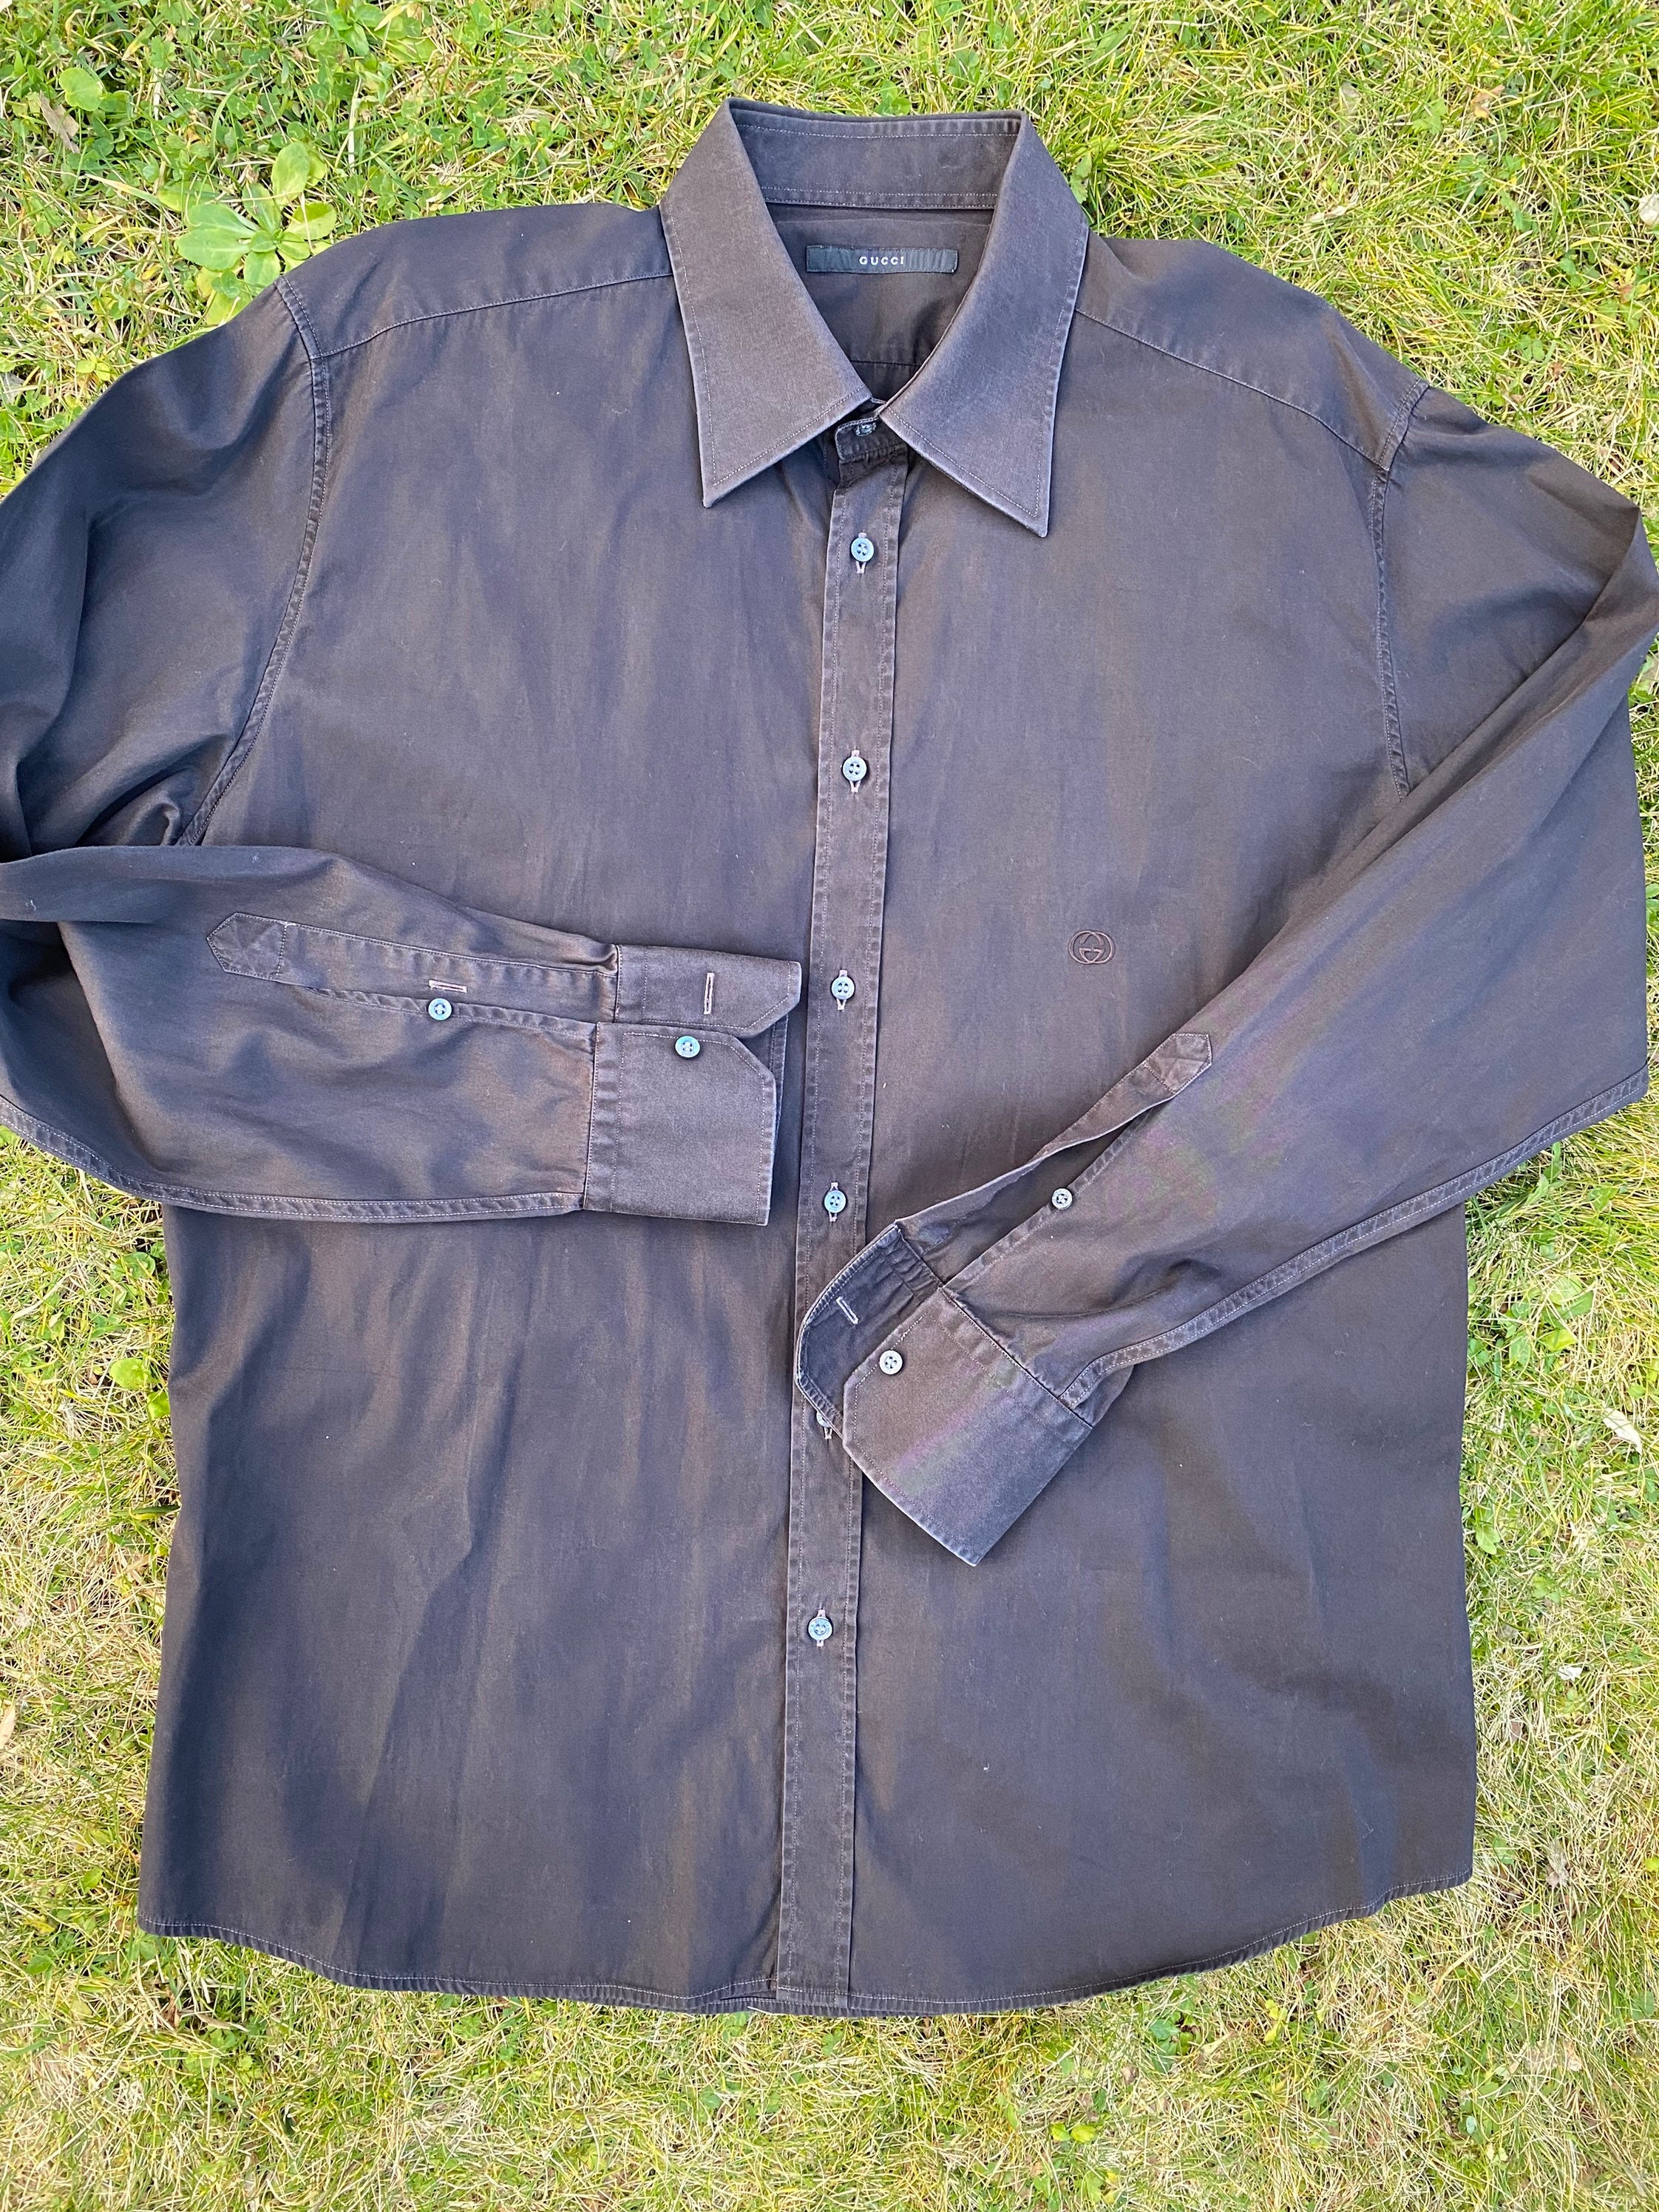 Gucci Button Down Shirt in Black for Men